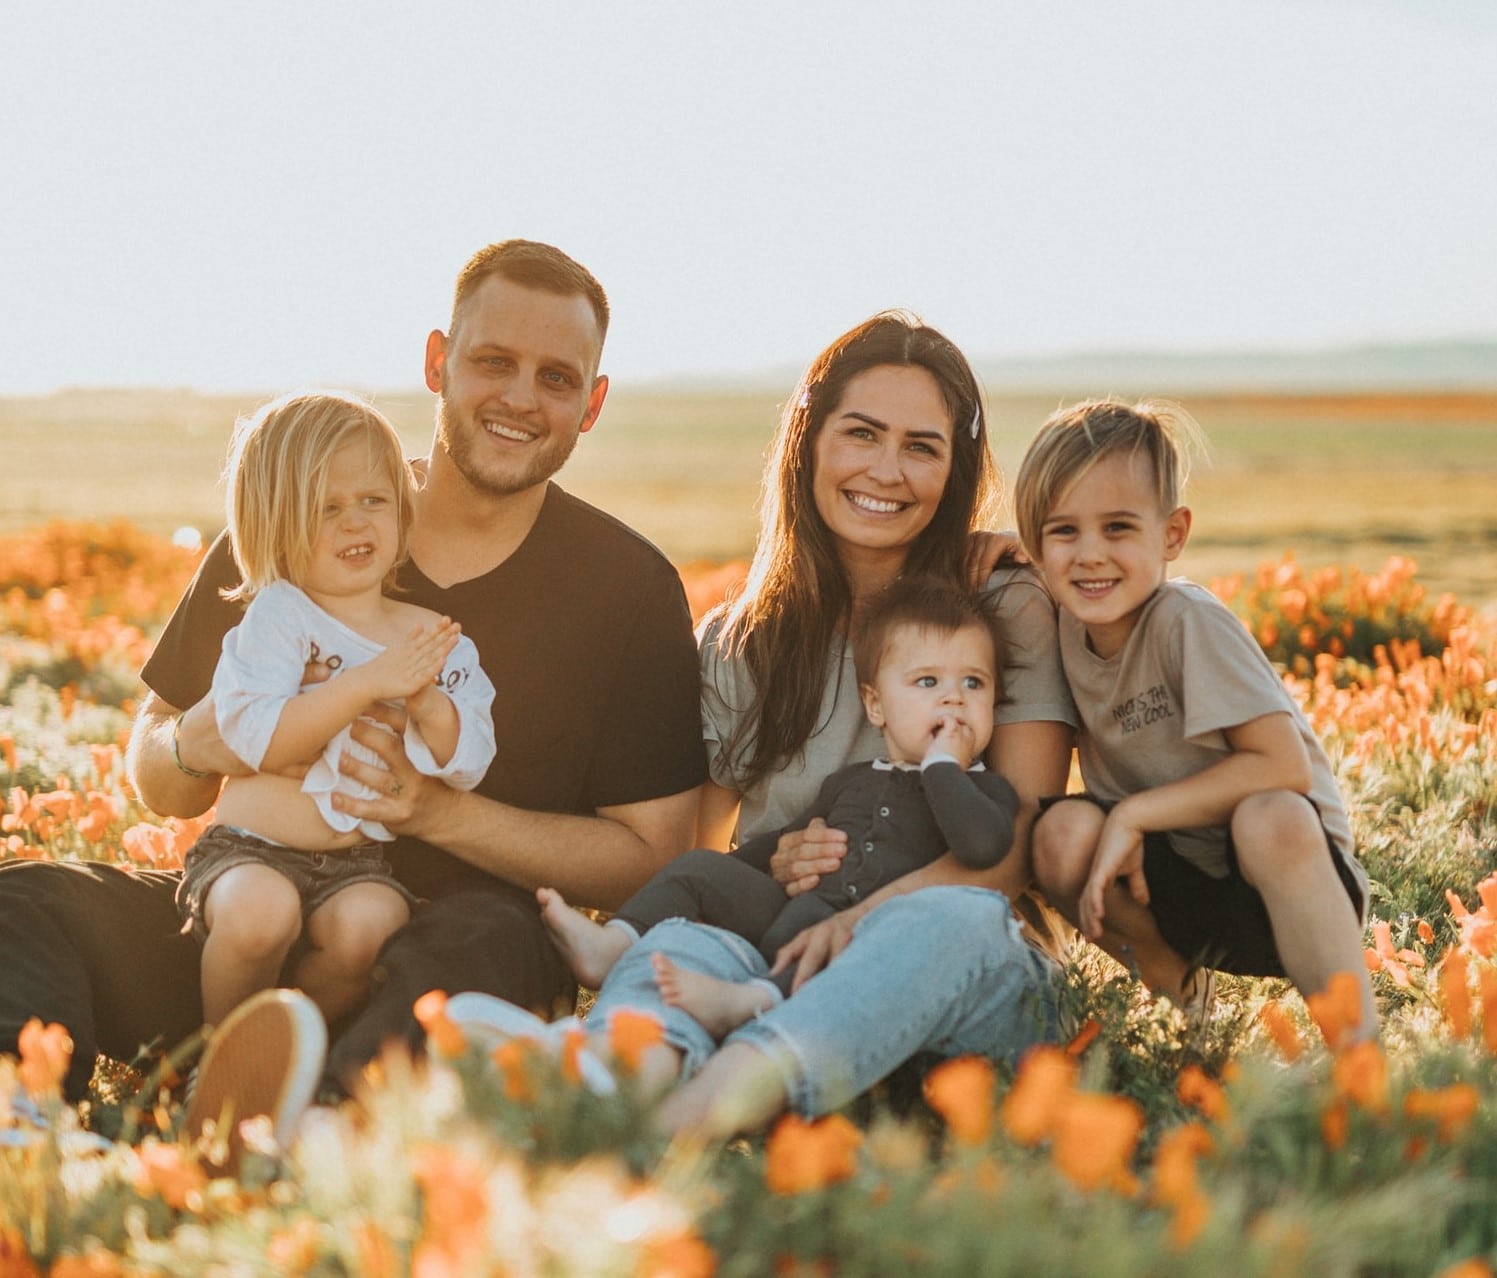 Protect Your Family In San Tan Valley With Professional Life Insurance Counseling